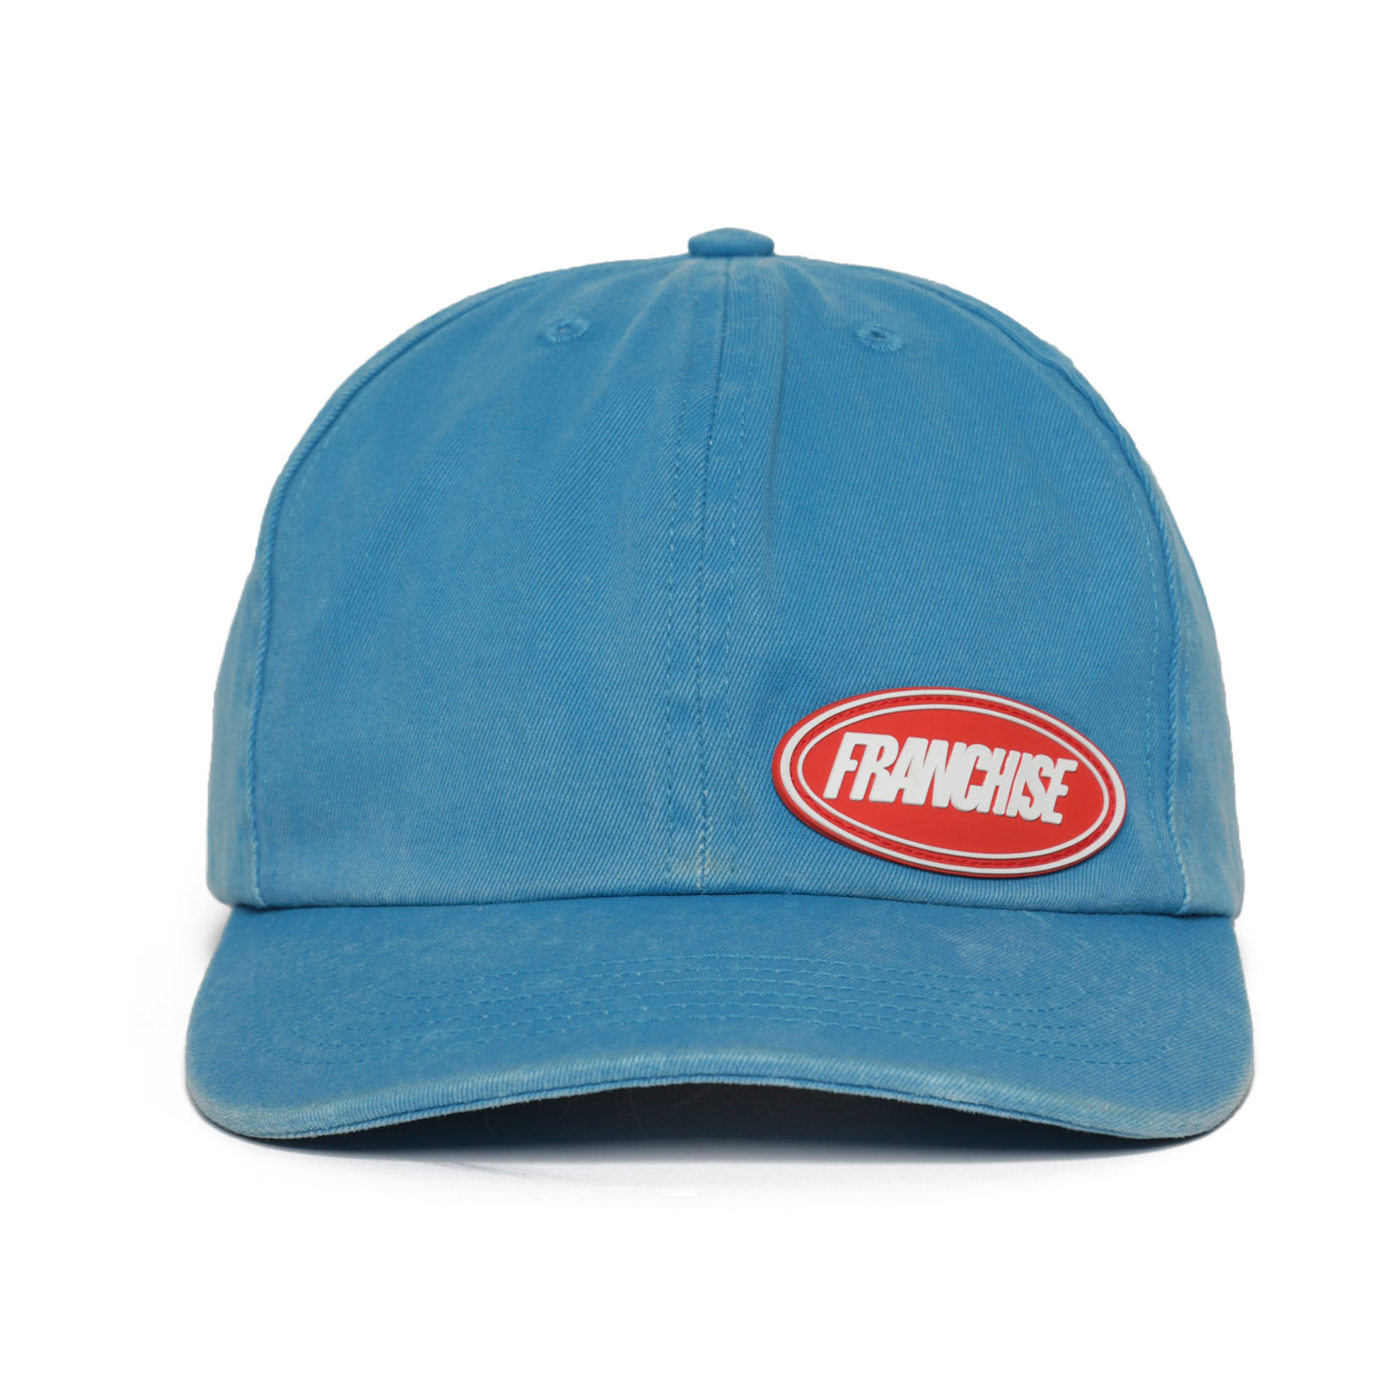 Corporate Athletics Washed Twill 6 Panel Hat